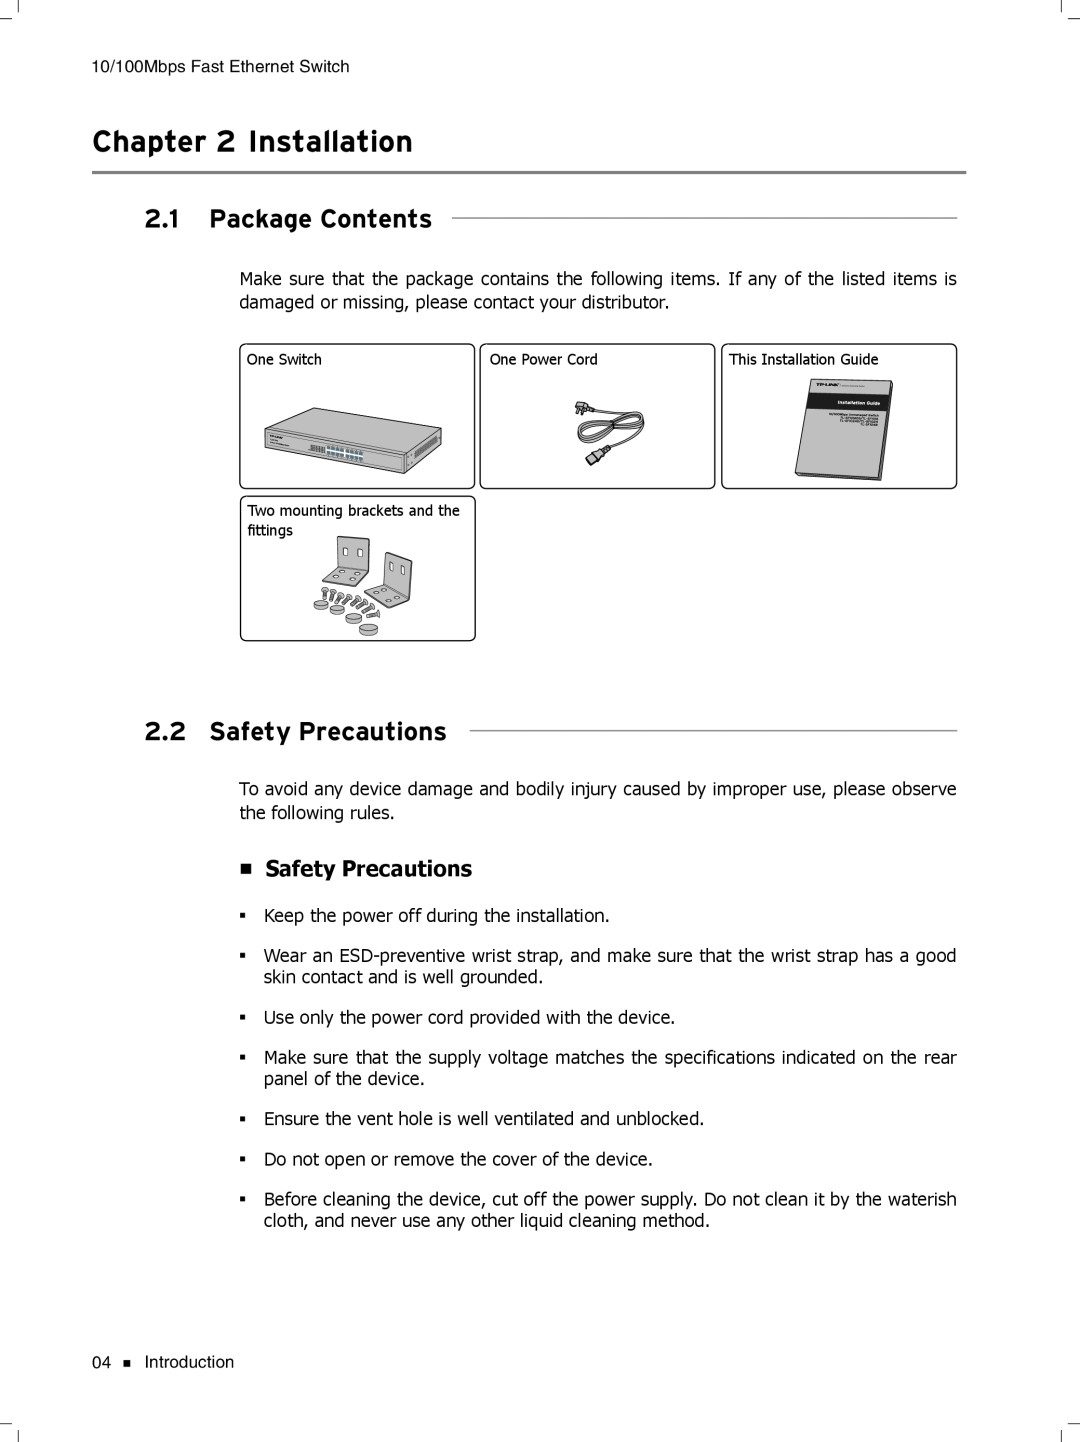 TP-Link TL-SF1048, TL-SF1024D, TL-SF1016DS manual CCCCCCCCCCInstallation, Package Contents, Safety Precautions 